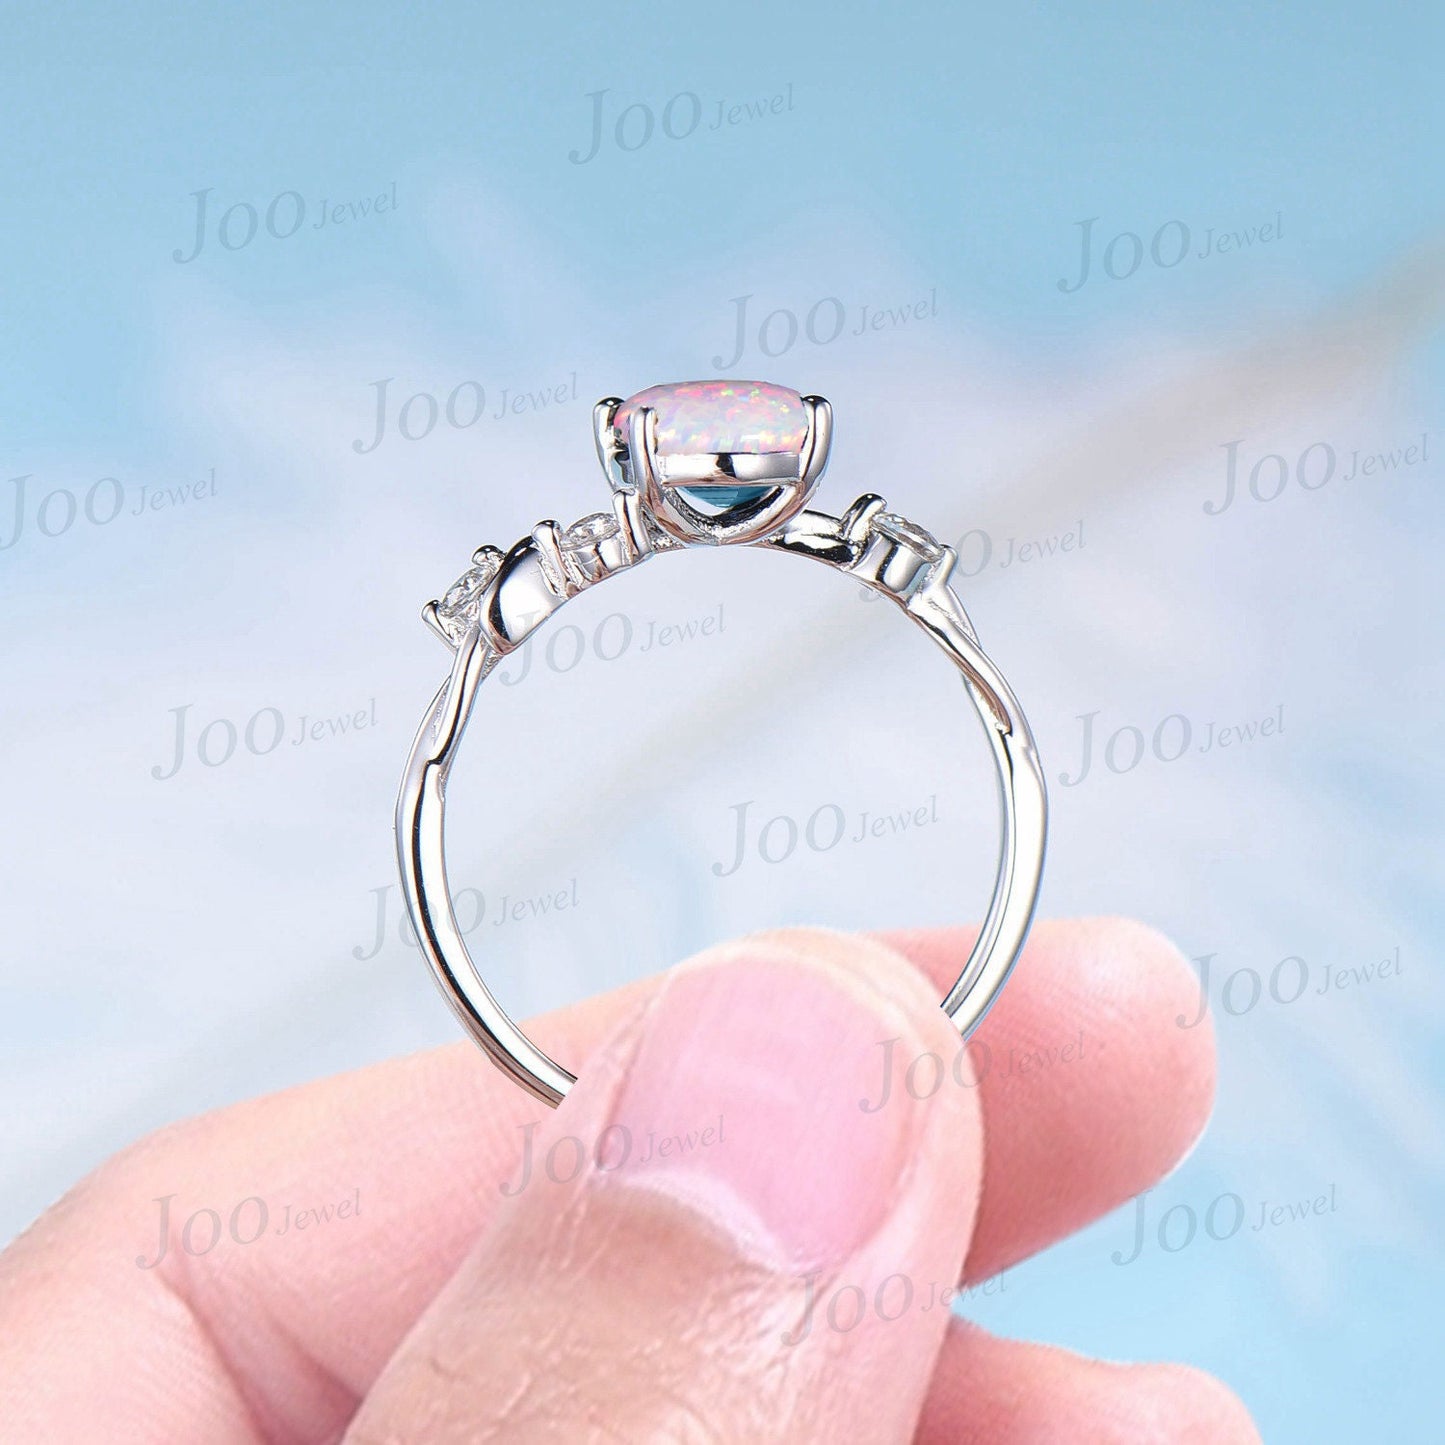 Unique Moon Star Engagement Ring 1.5ct Oval Cut White Opal Wedding Ring 10K Rose Gold Moissanite Opal Celestial Promise Ring Half Moon Ring